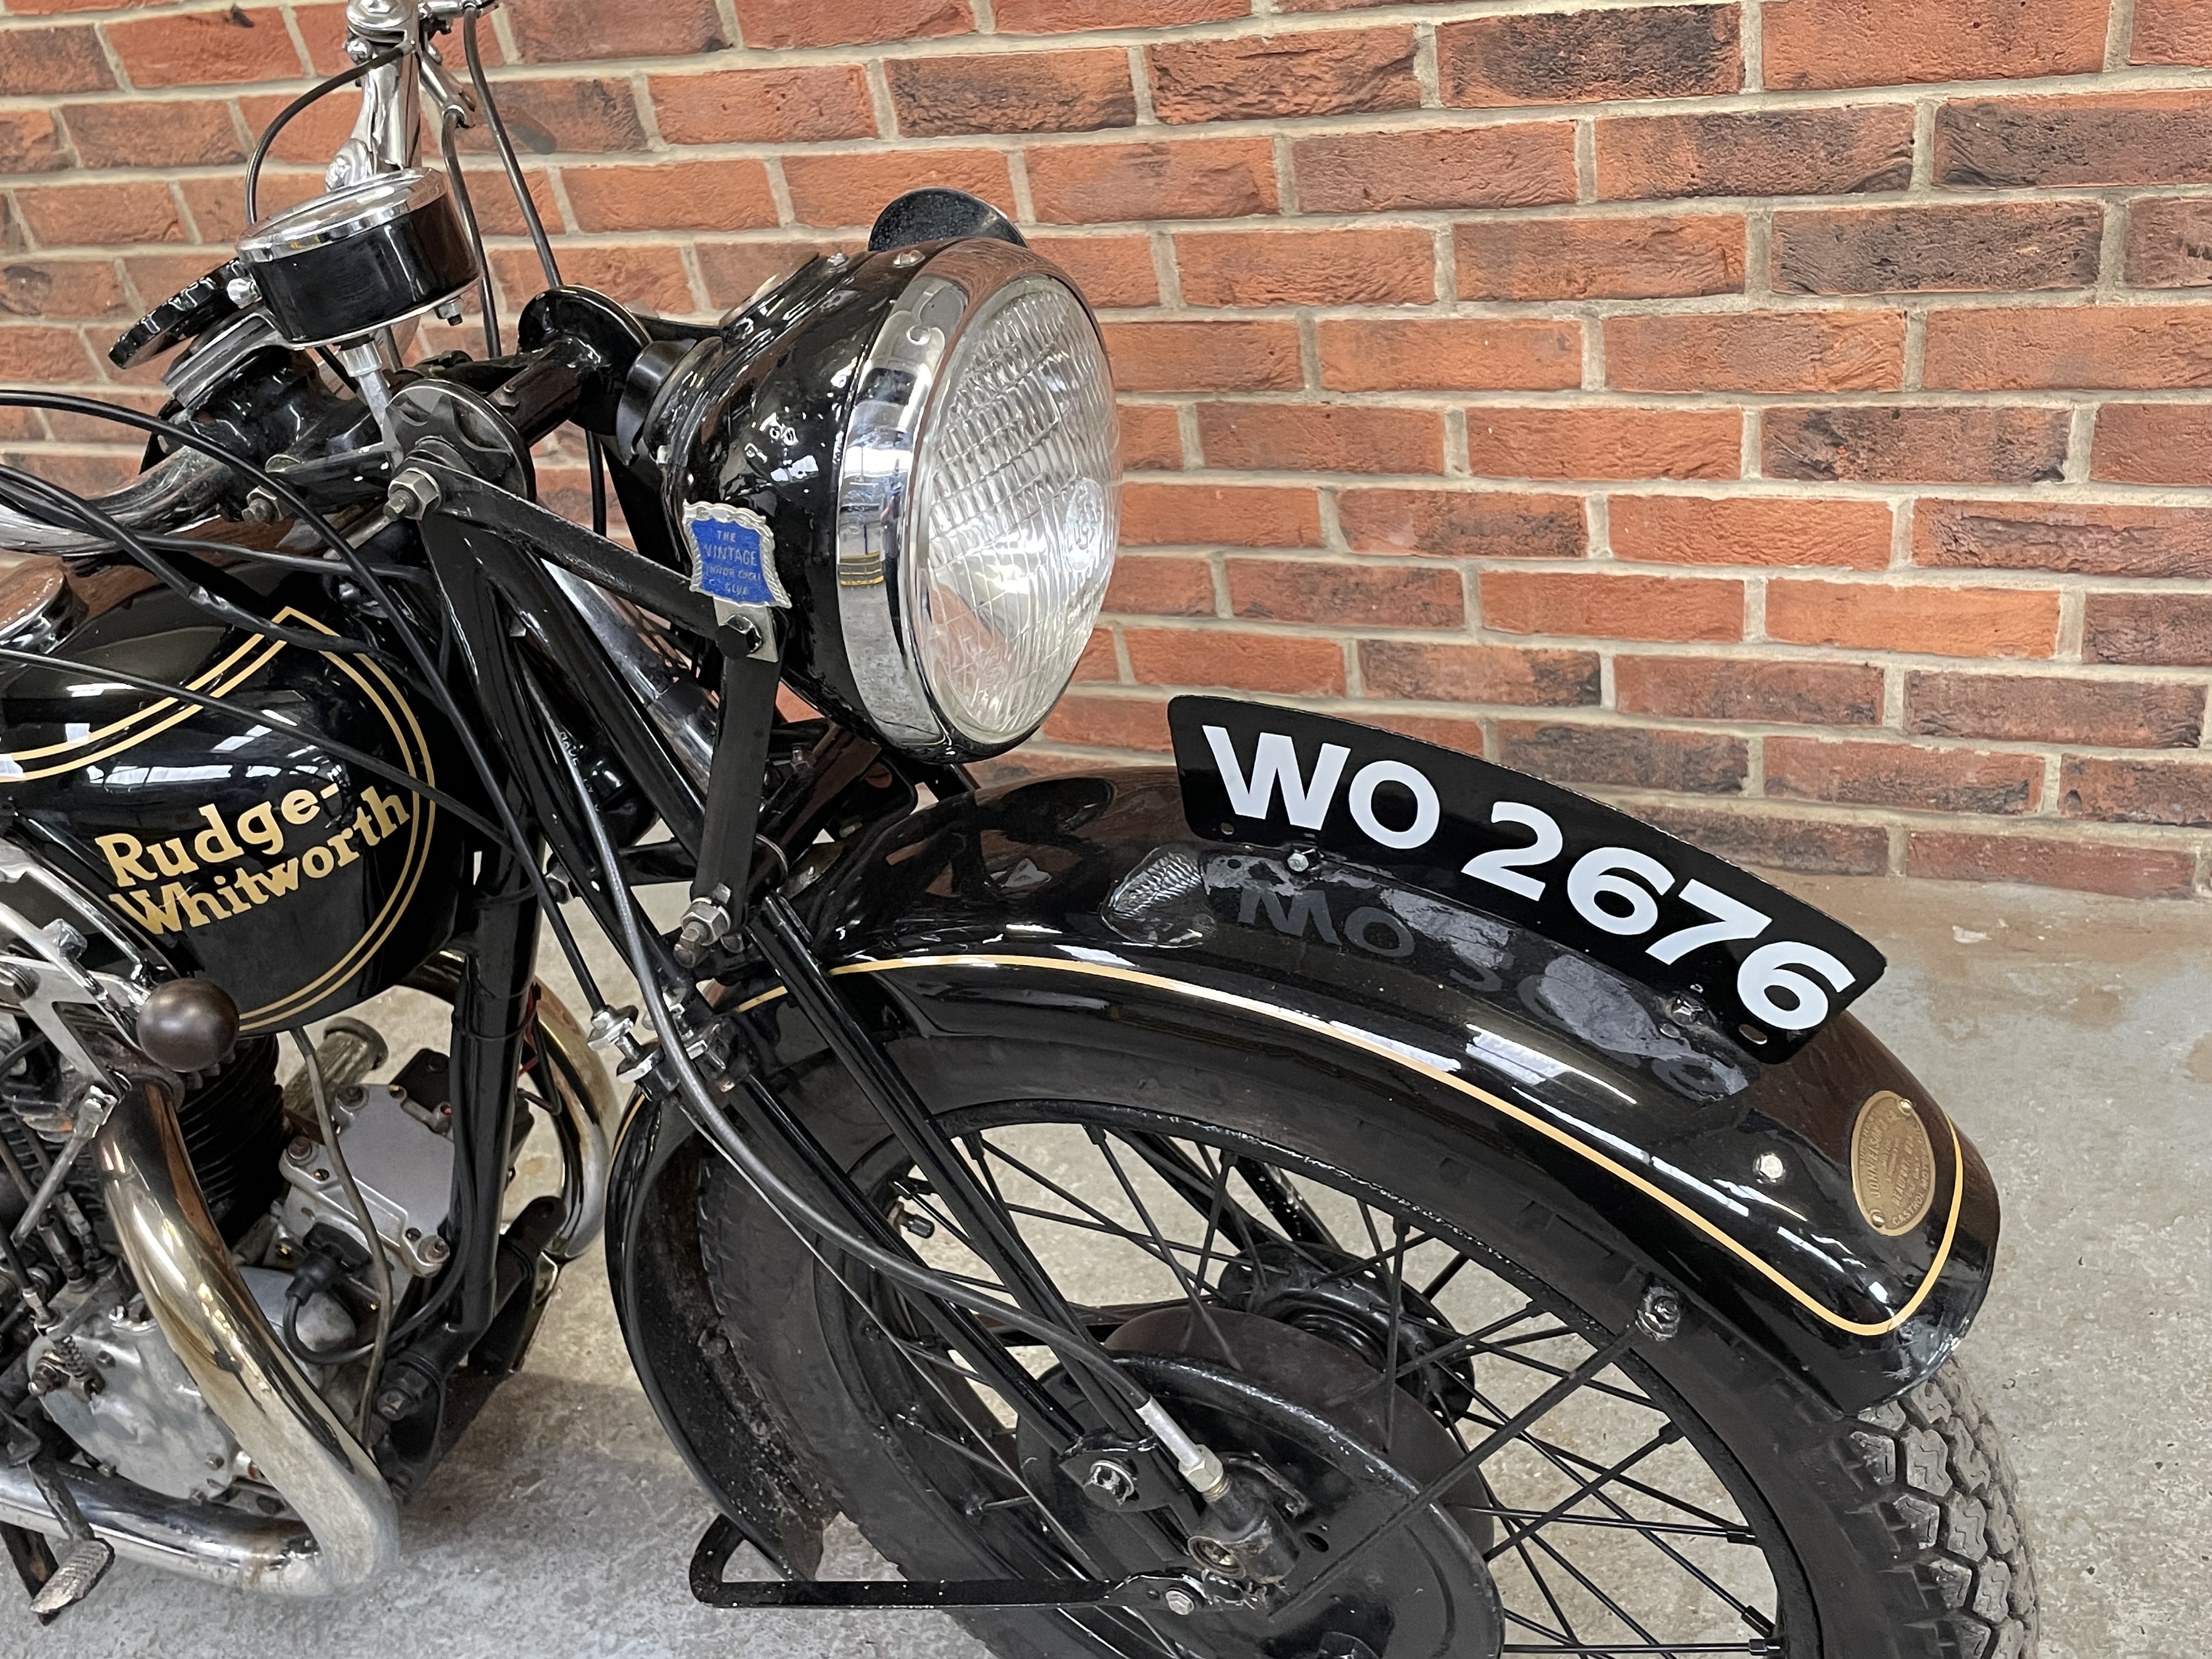 1929 Rudge-Whitworth Special - Image 2 of 12